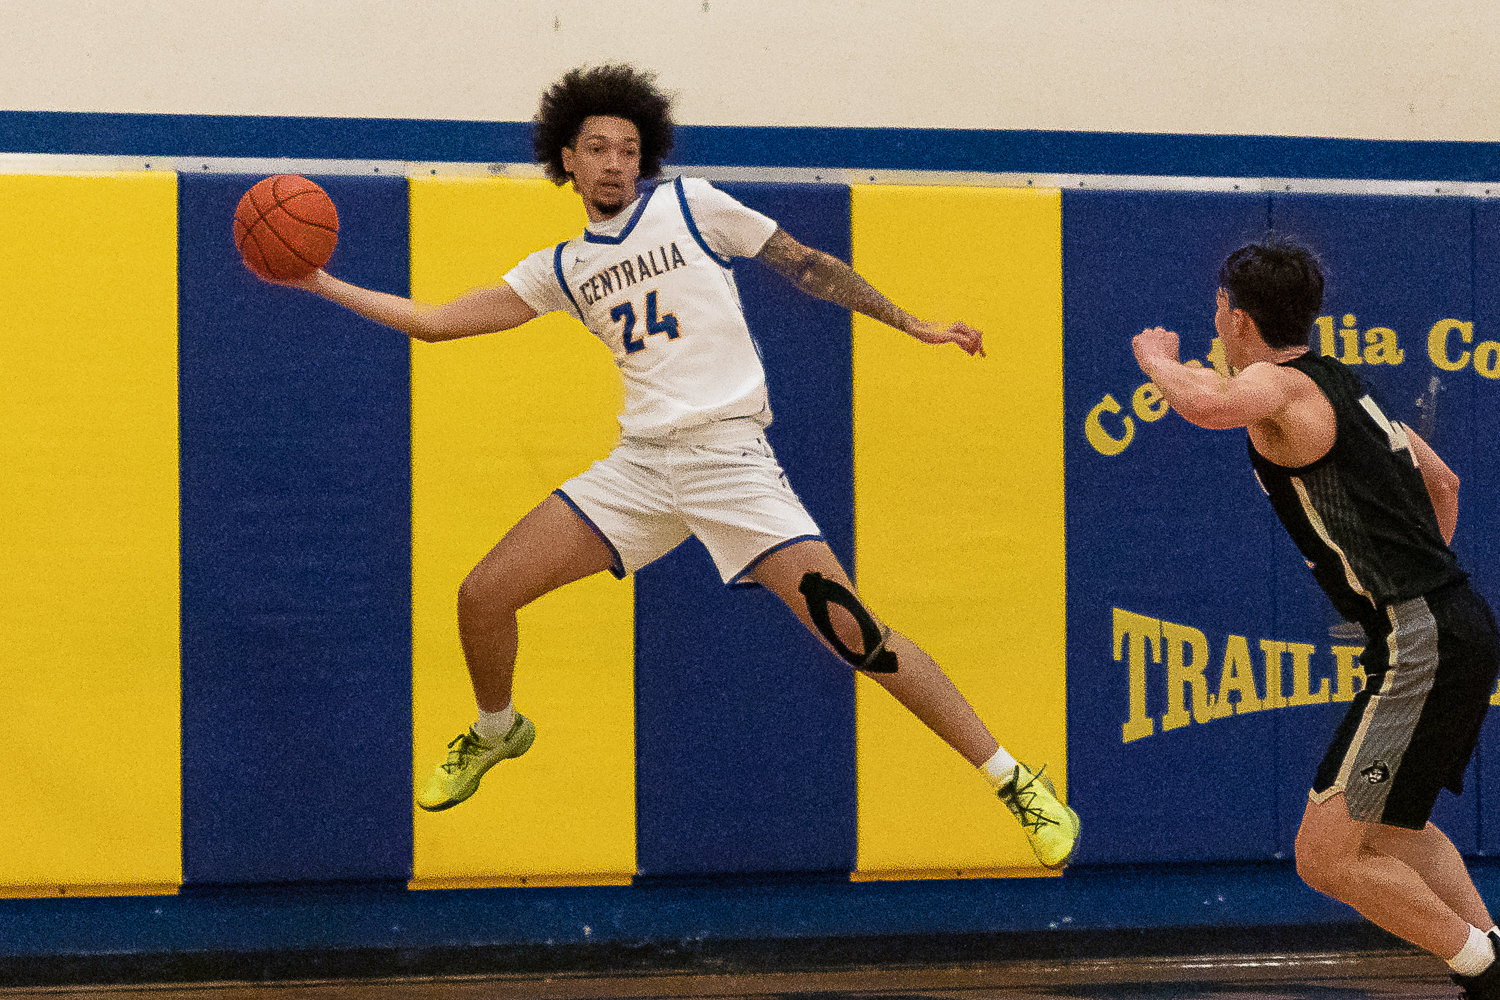 Centralia College wing Deshawn Keperling saves an errant ball against Peninsula Dec. 7.